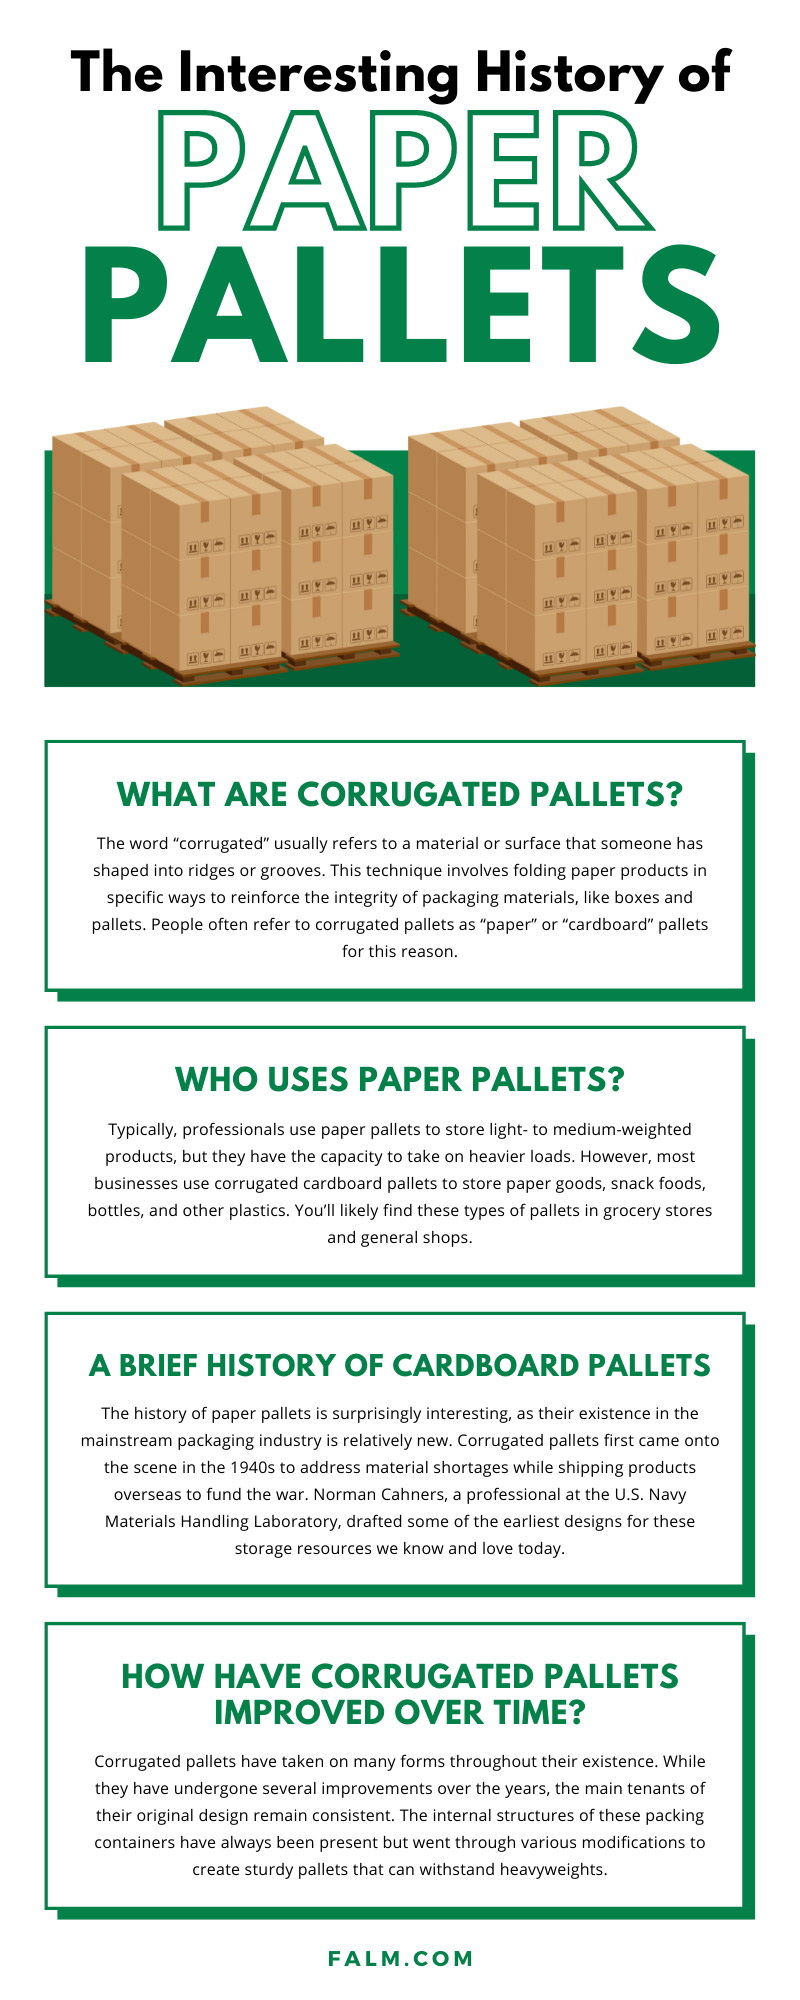 The Interesting History of Paper Pallets